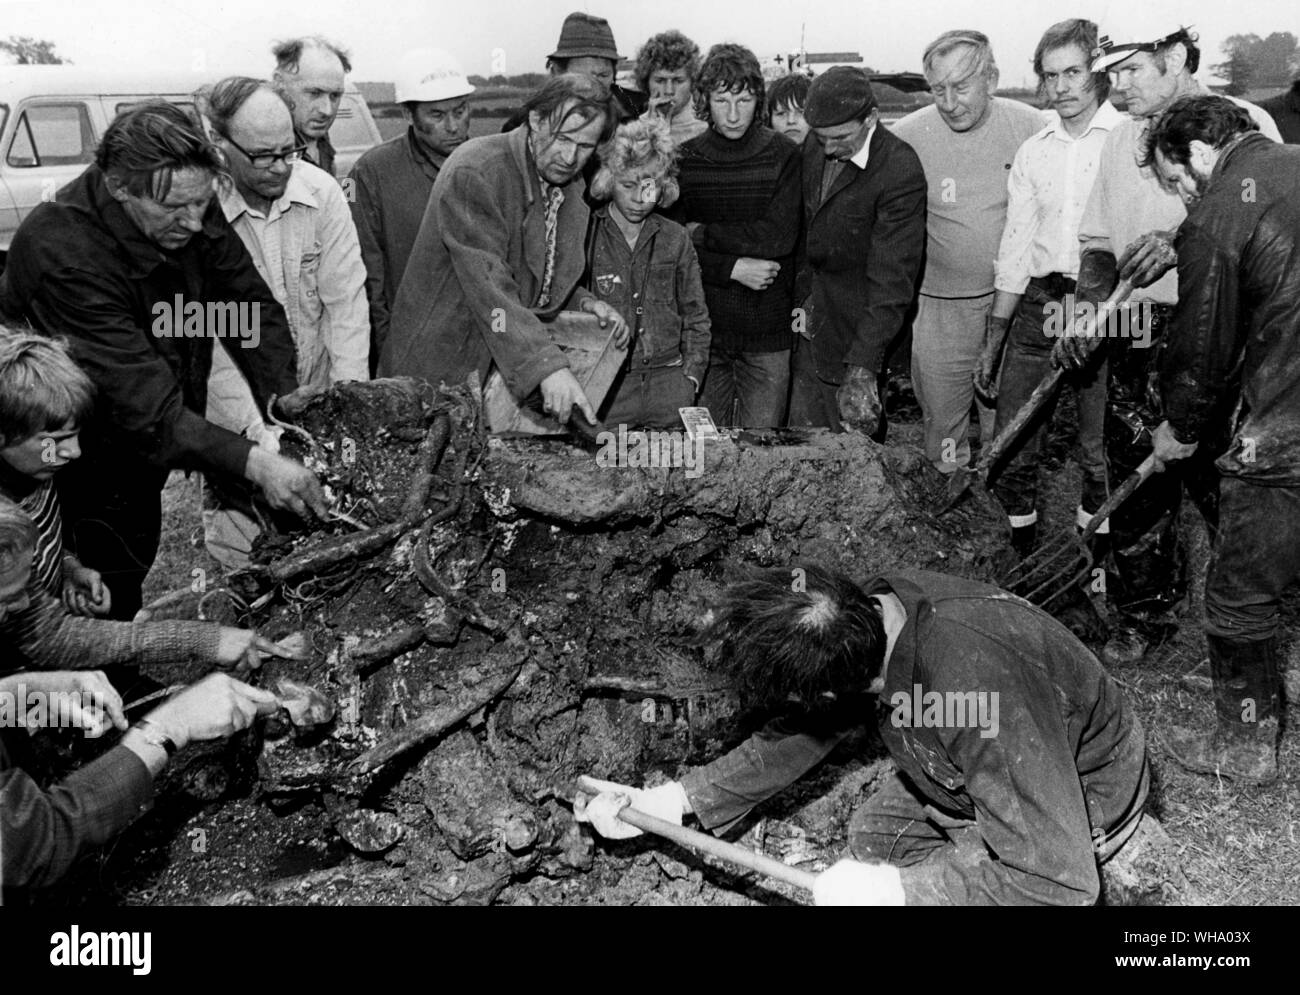 Excavation work to retrieve an engine from WW2. From 'Kentish Express', 1975 news. Stock Photo